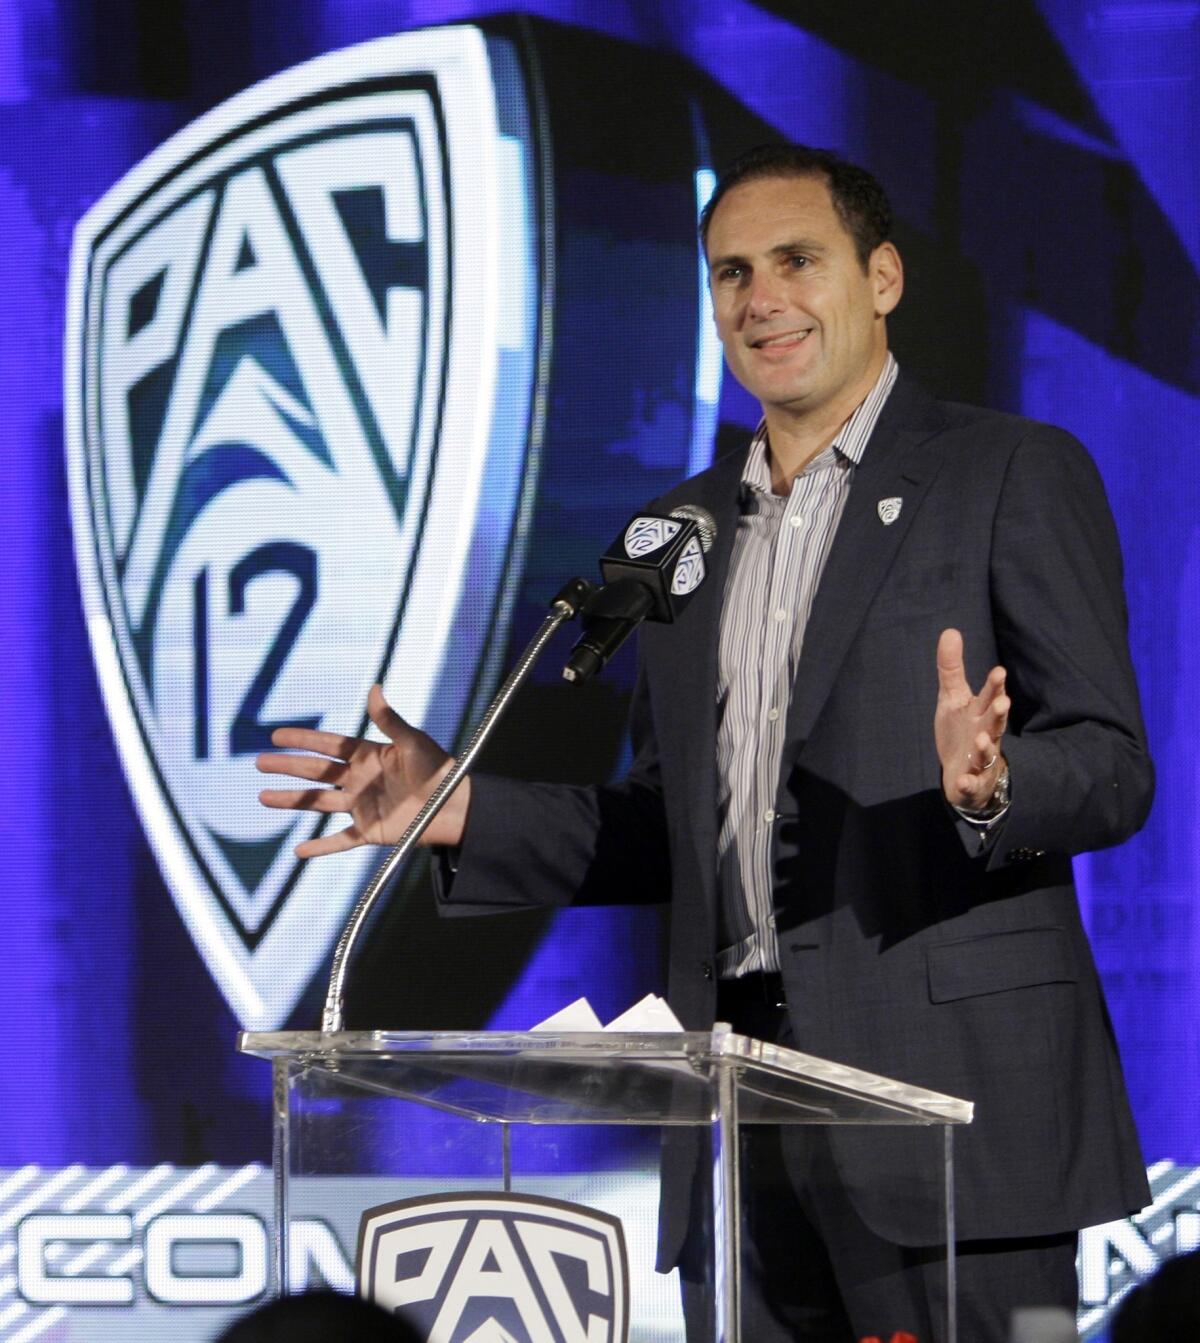 Larry Scott is set to continue his role as Pac-12 Commissioner through the 2017-18 academic year.